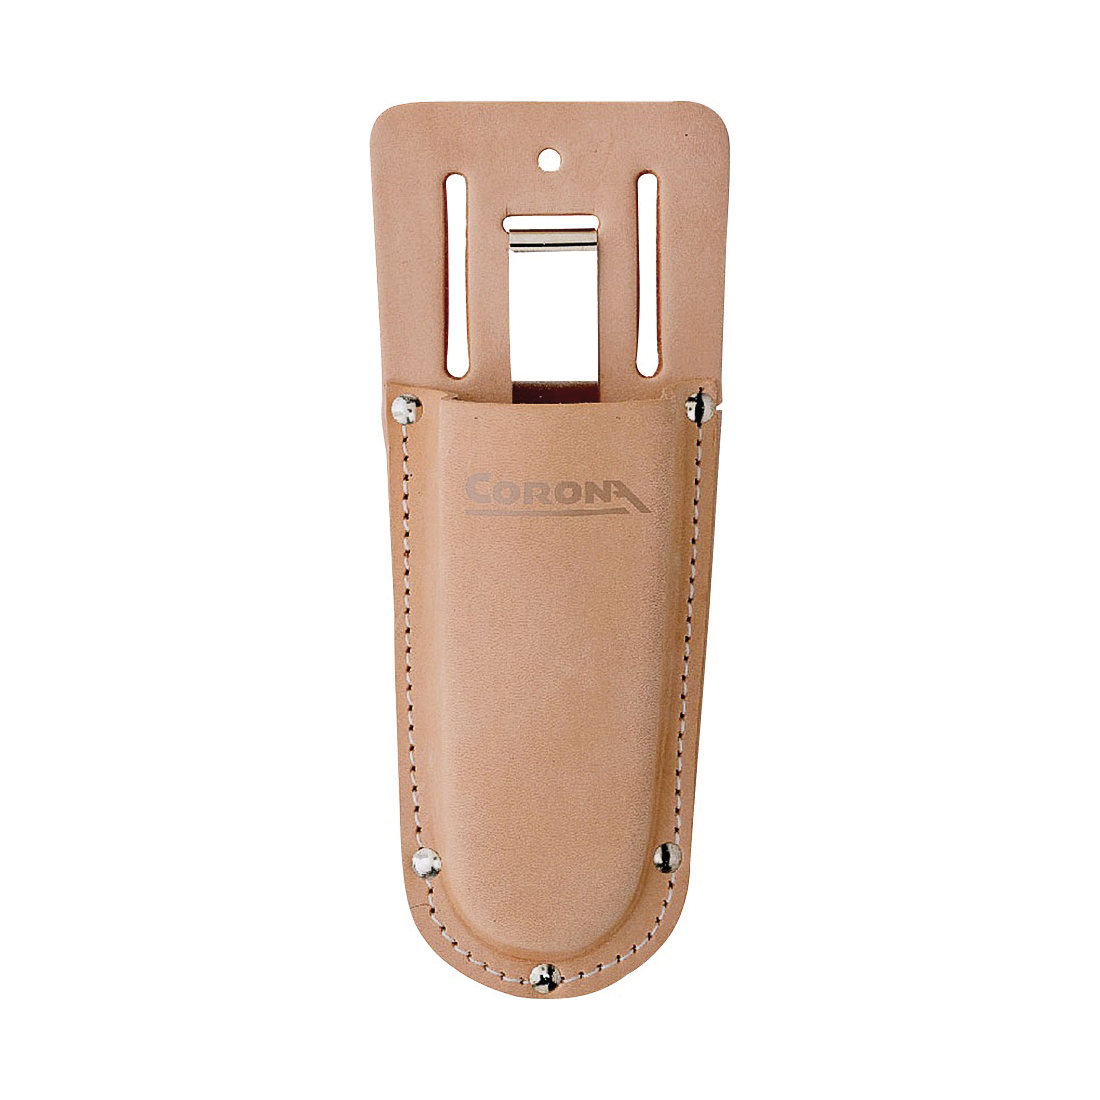 AC 7220 Scabbard Pruner, Leather Handle, 5 in OAL